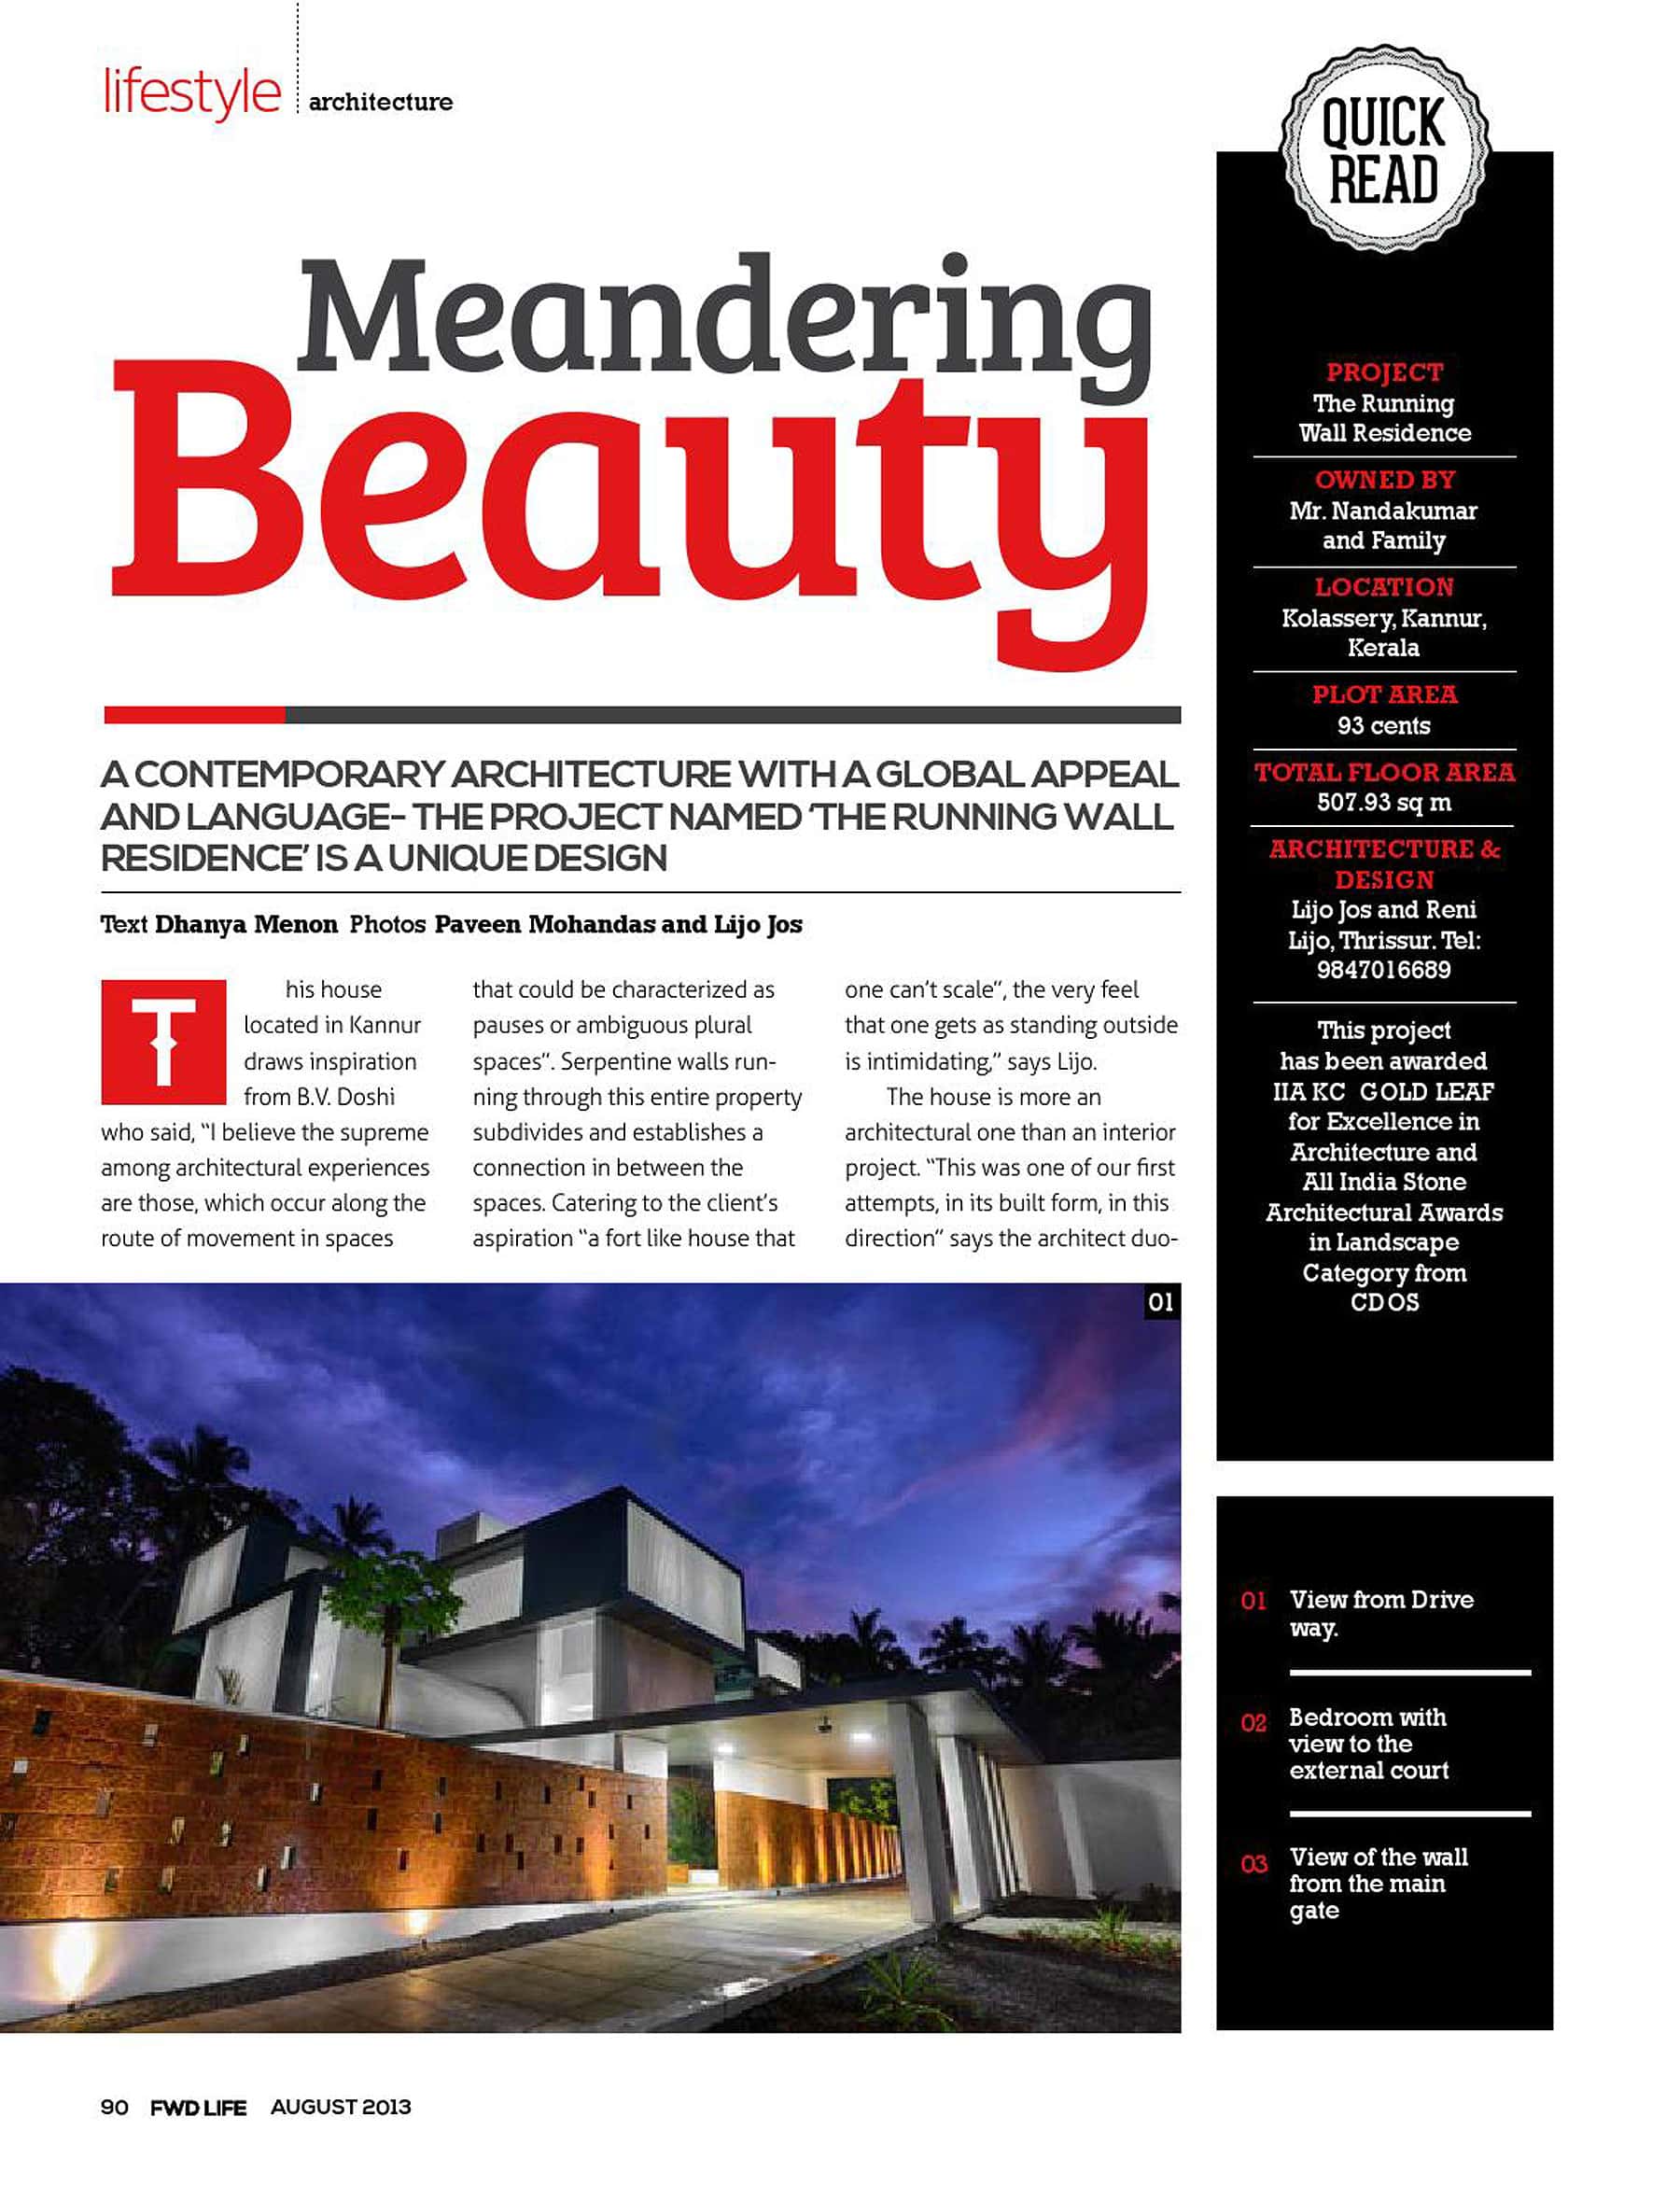 fwd-magazine-india-feature-the-running-wall-residence-1